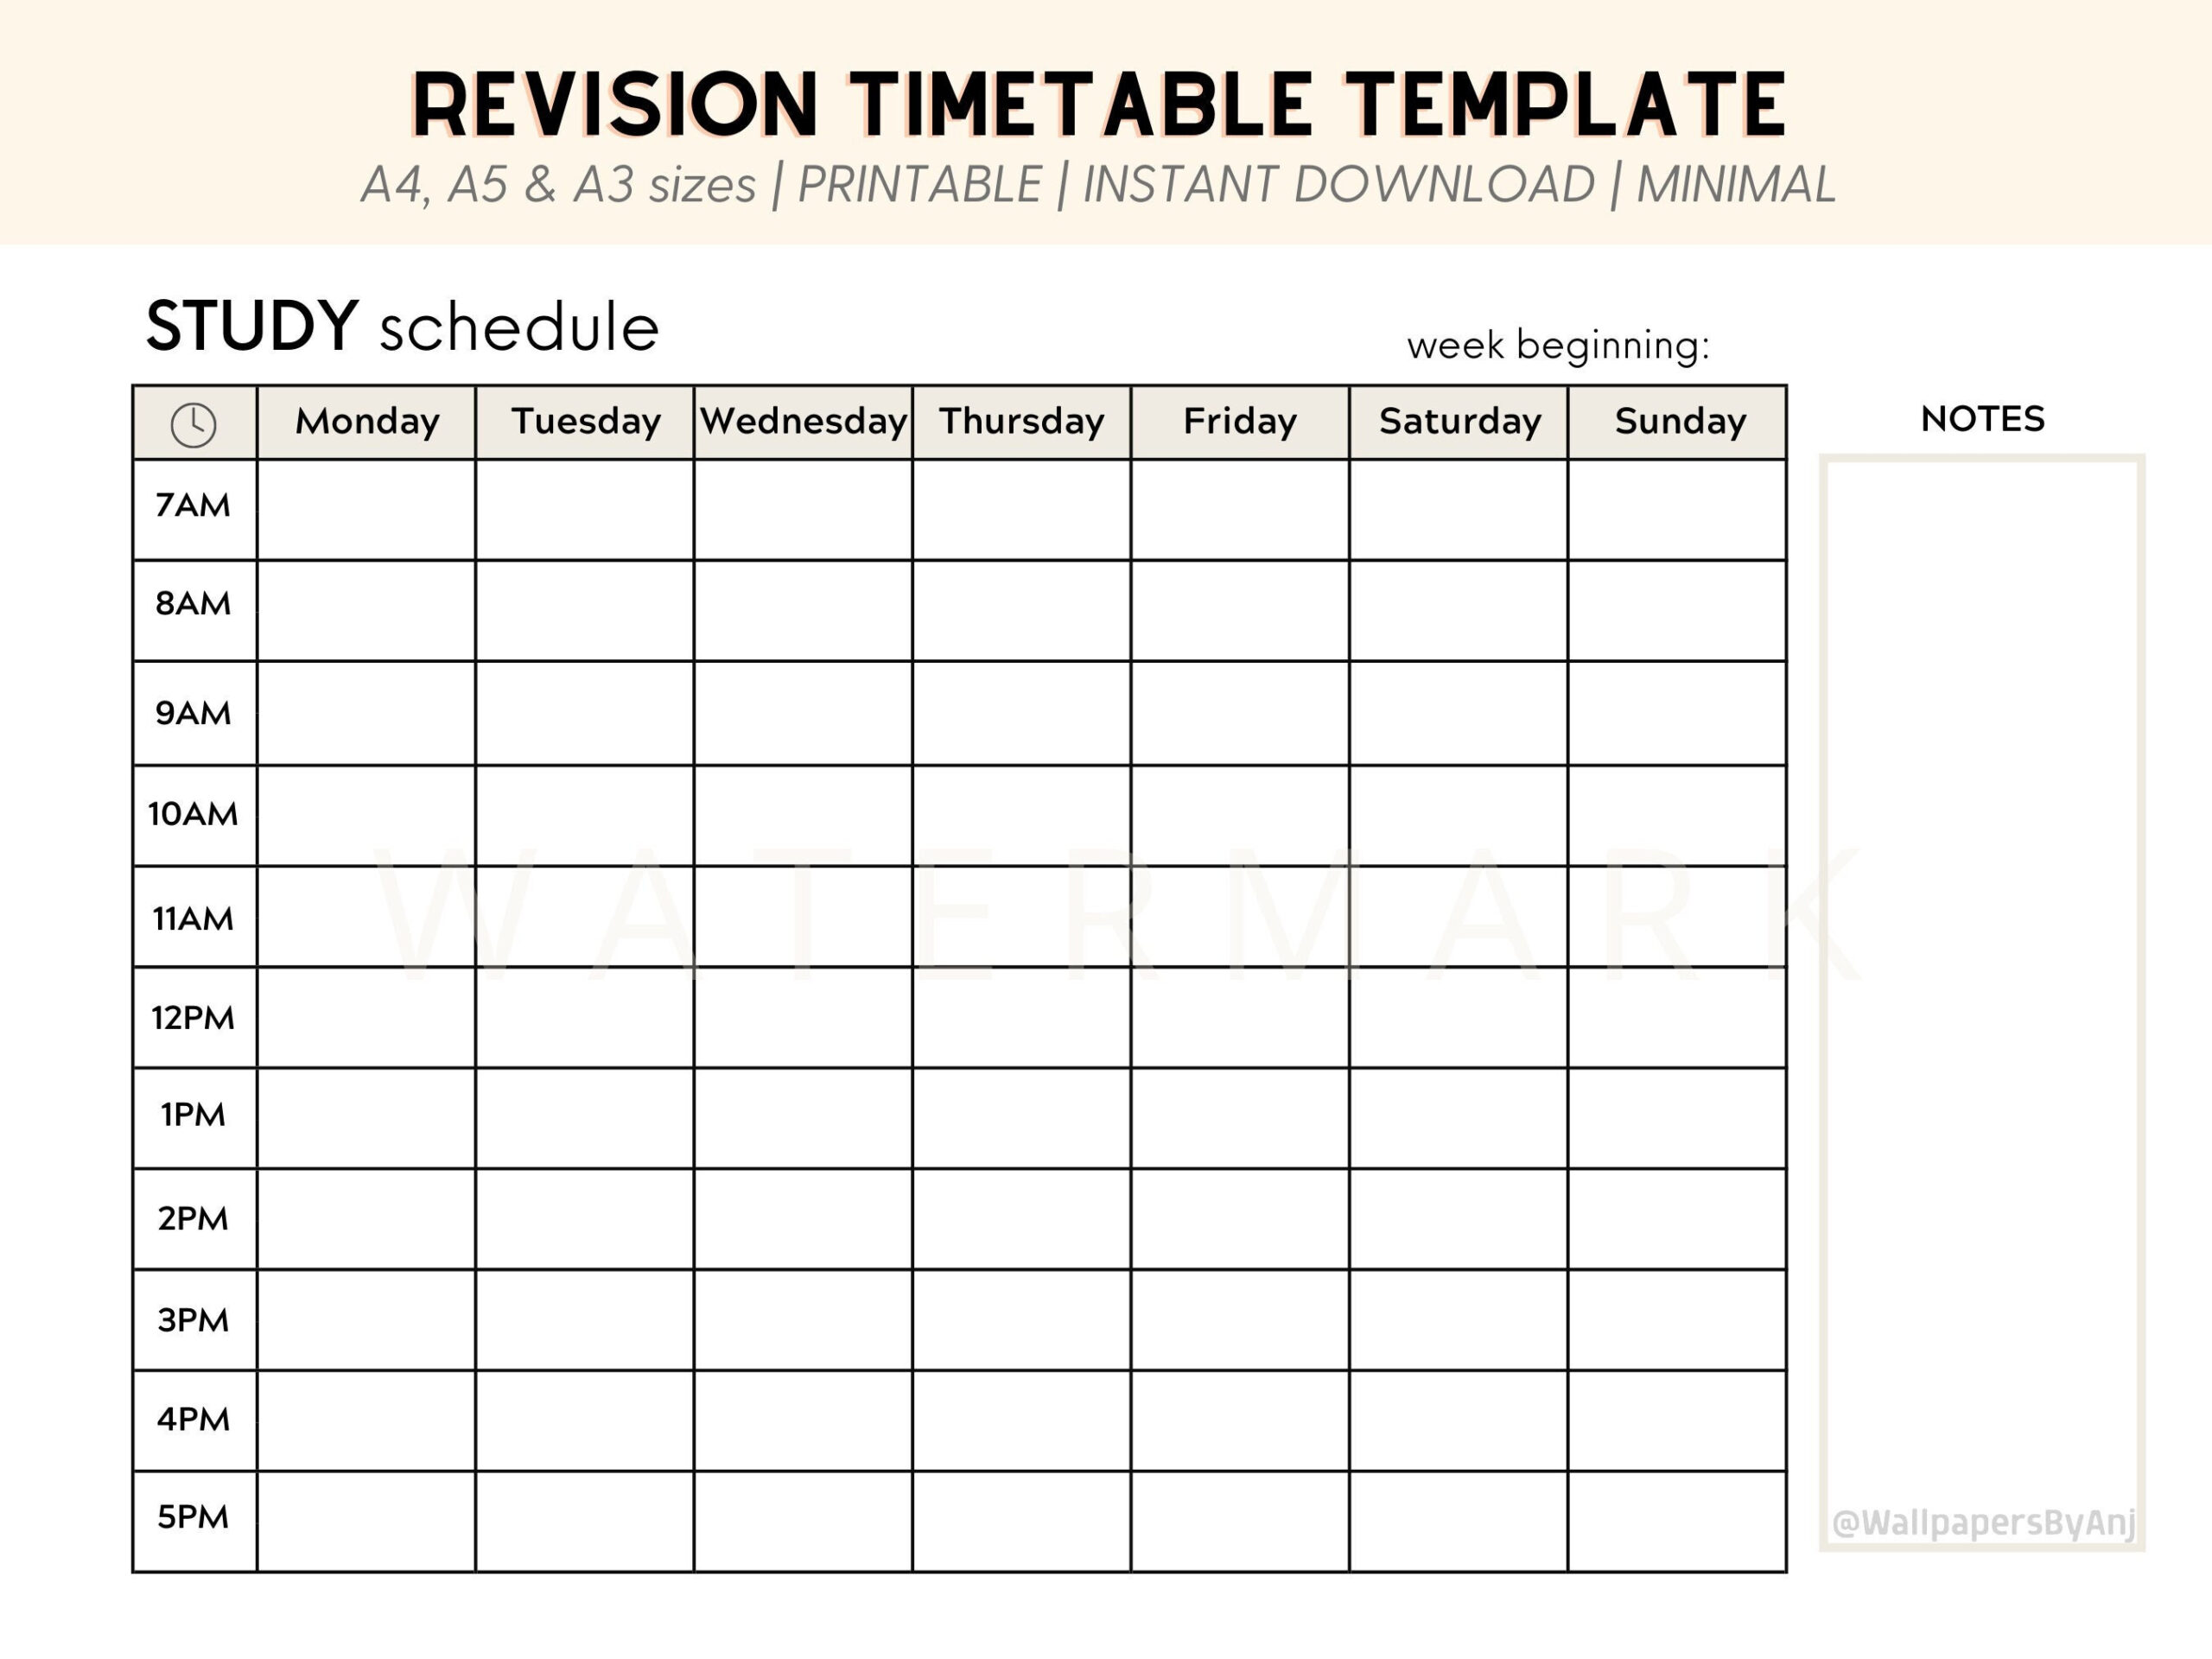 Revision Timetable Template (Weekly)  Minimal With Regard To Blank Revision Timetable Template